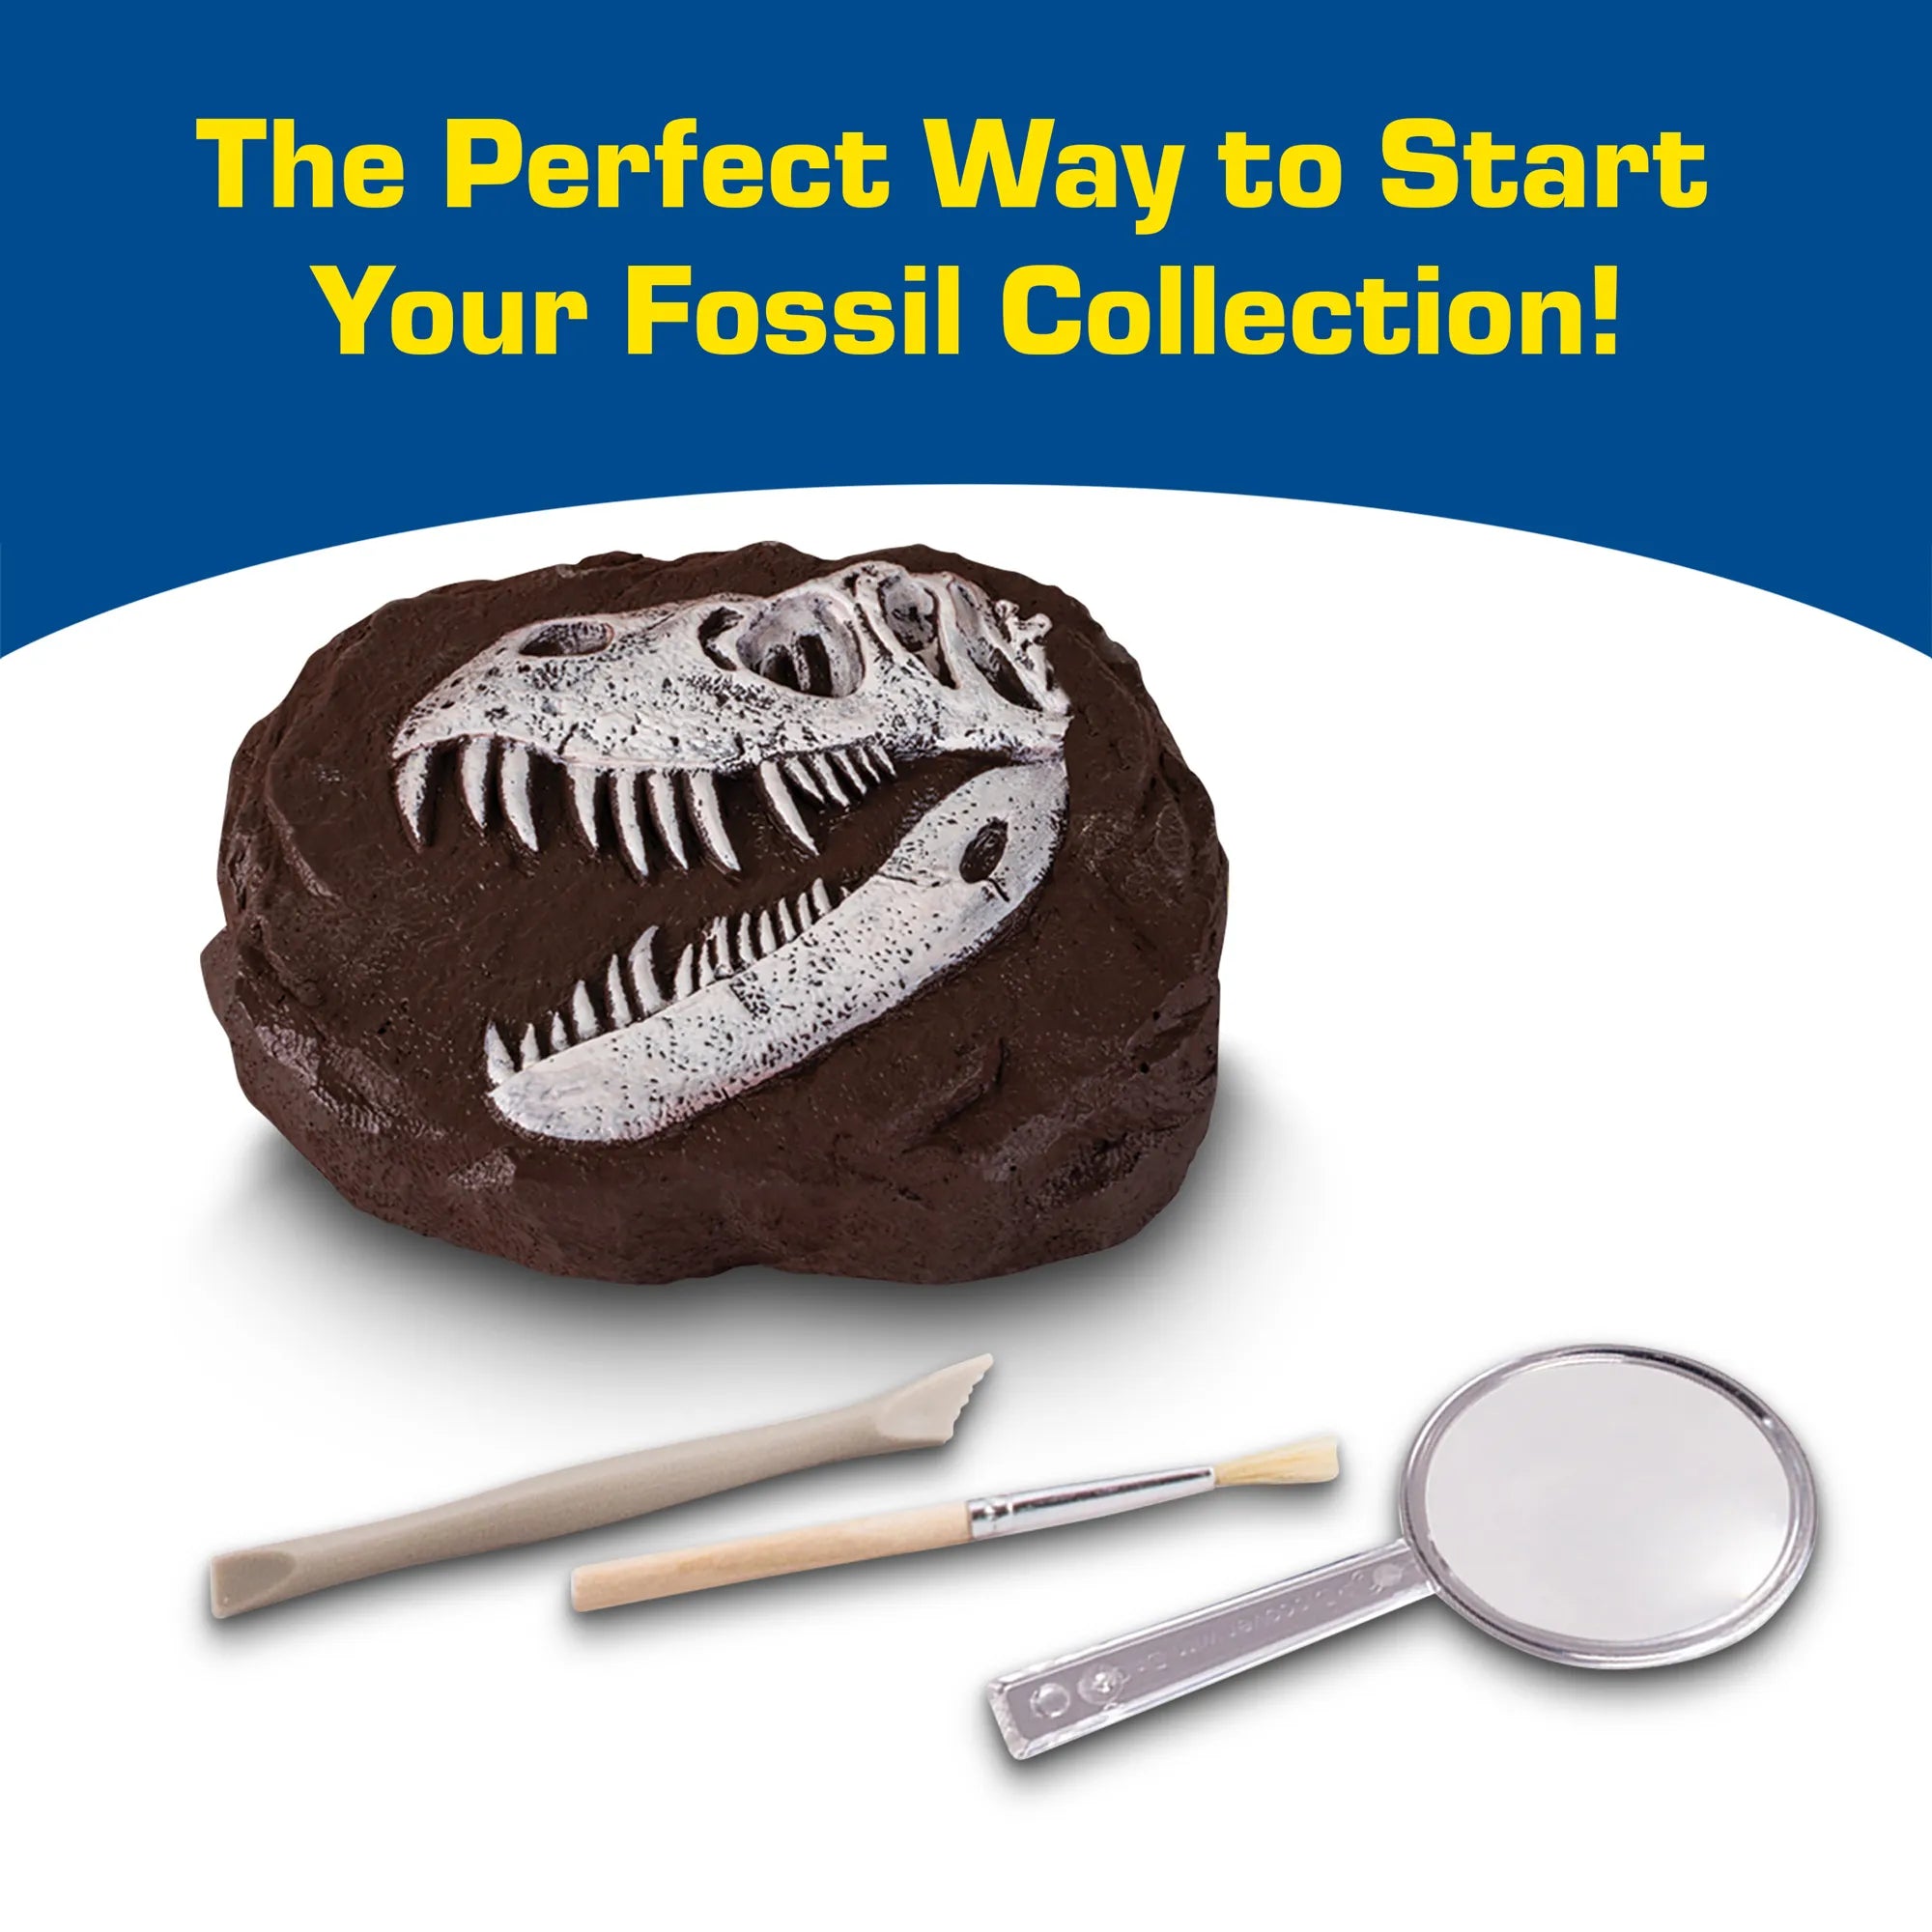 National Geographic Dino Fossil Dig Kit - Age 8+ - Brown's Hobby & Game